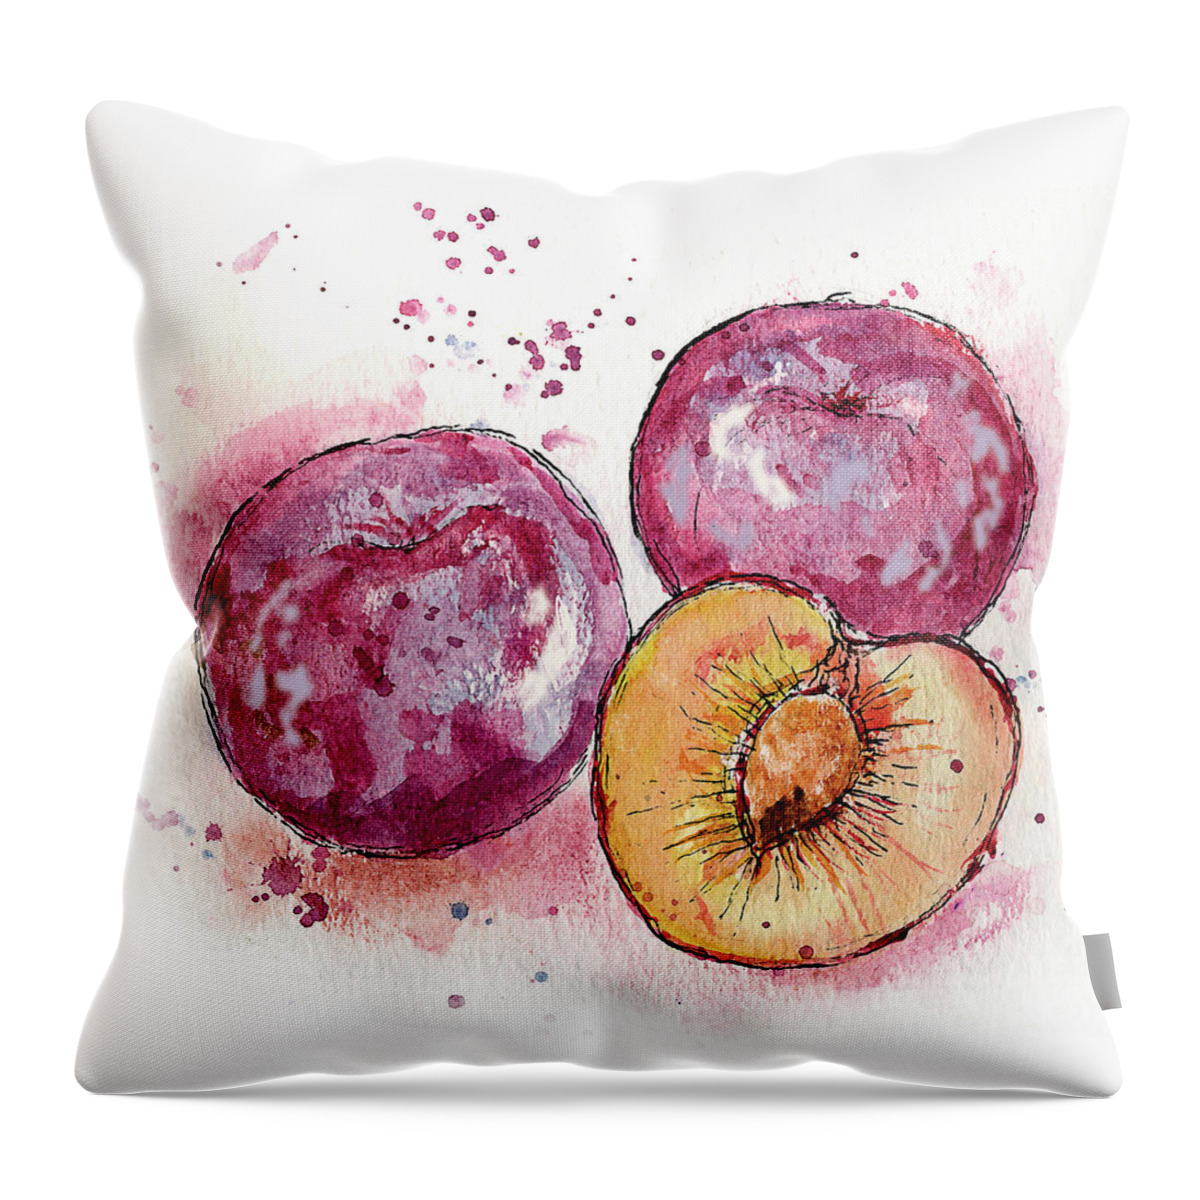 Art Throw Pillow featuring the painting Close Up Of Three Plums by Ikon Ikon Images